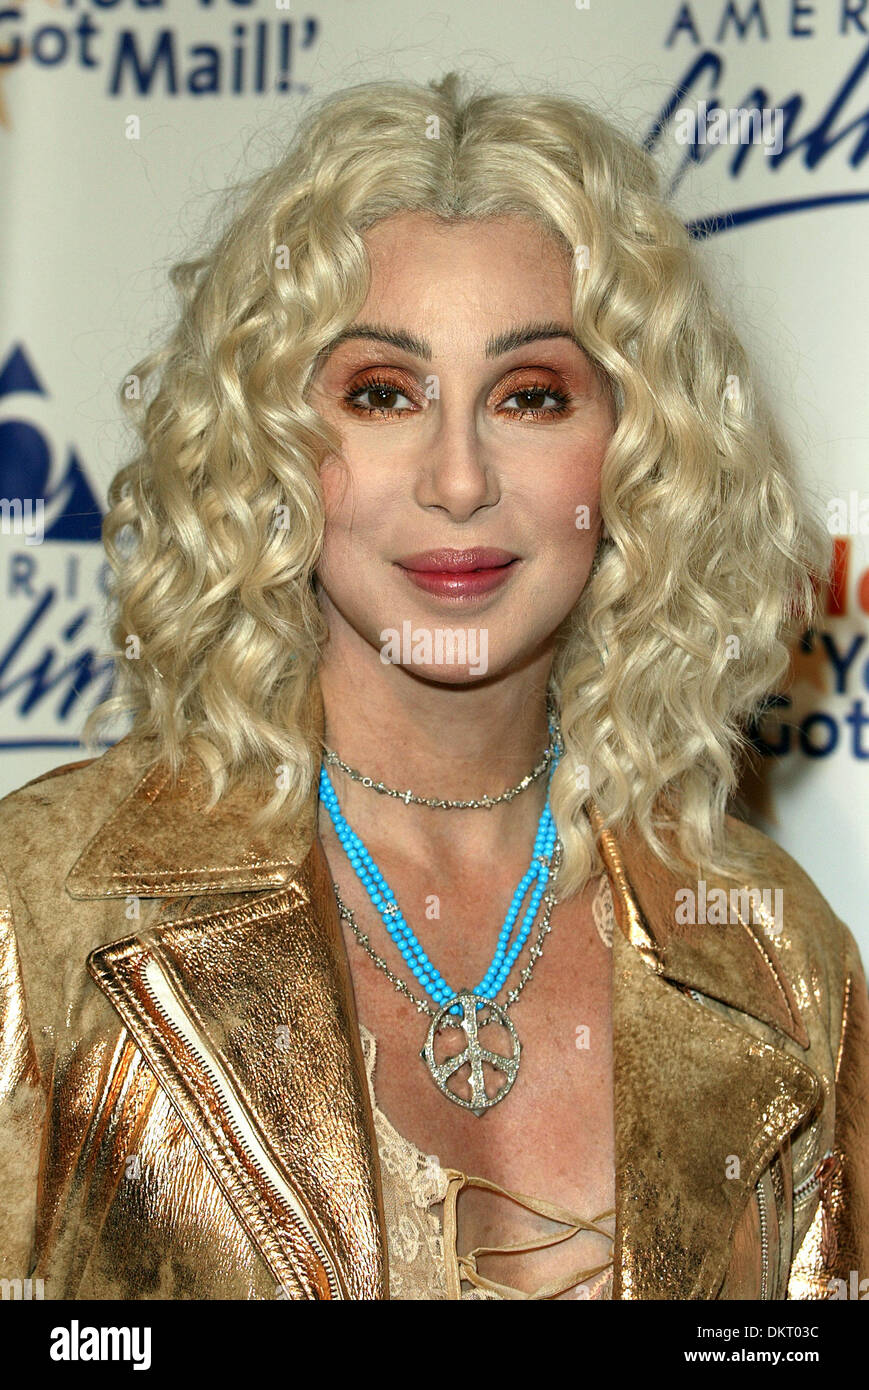 CHER.SINGER & ACTRESS.WOOD, LOS ANGELES, USA.THE HIGHLANDS HOLLYWOOD, HOLLY.14/05/2002.LA3734 Stock Photo